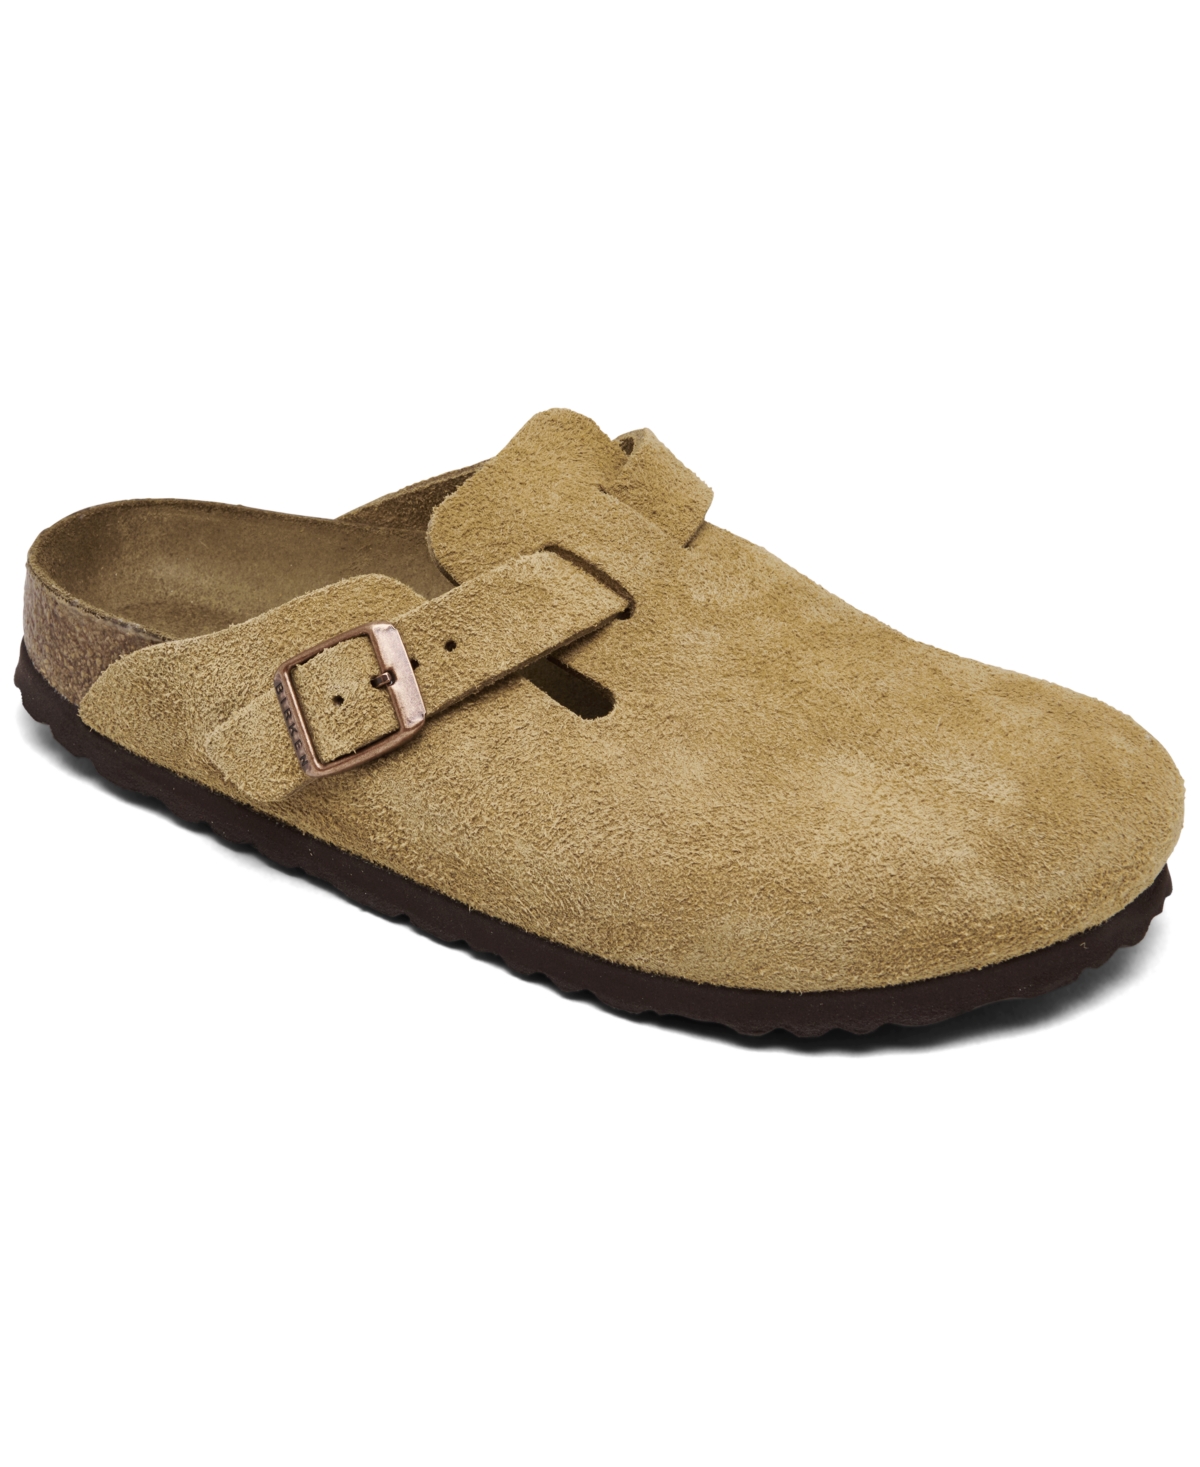 Women's Boston Suede Leather Clogs from Finish Line - Faded Khaki